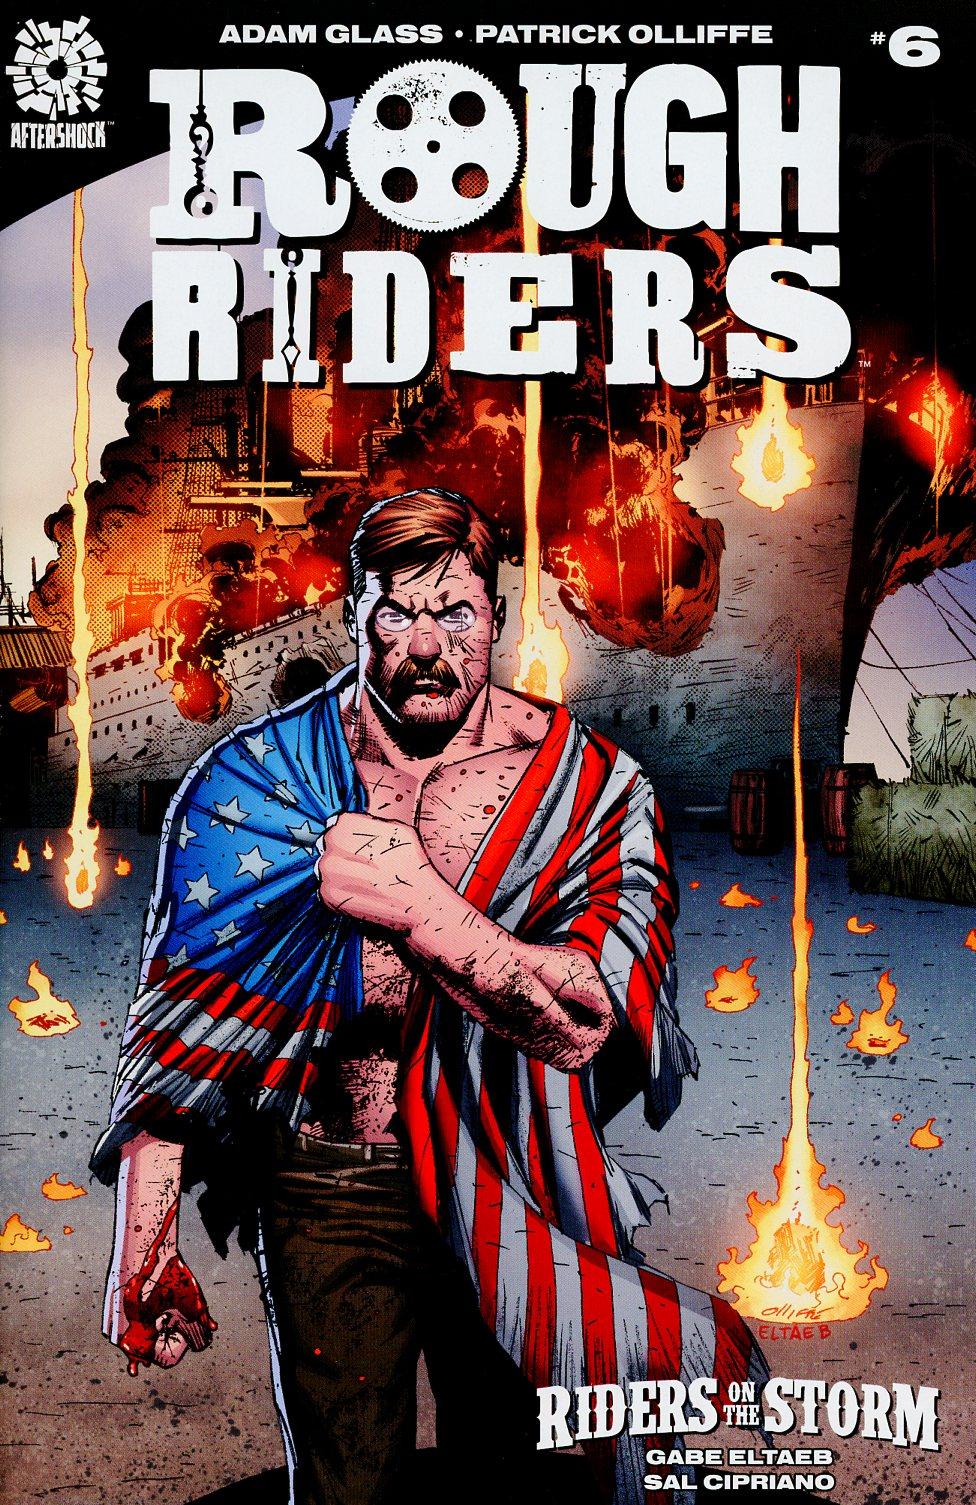 Rough Riders Riders On The Storm Vol. 1 #6